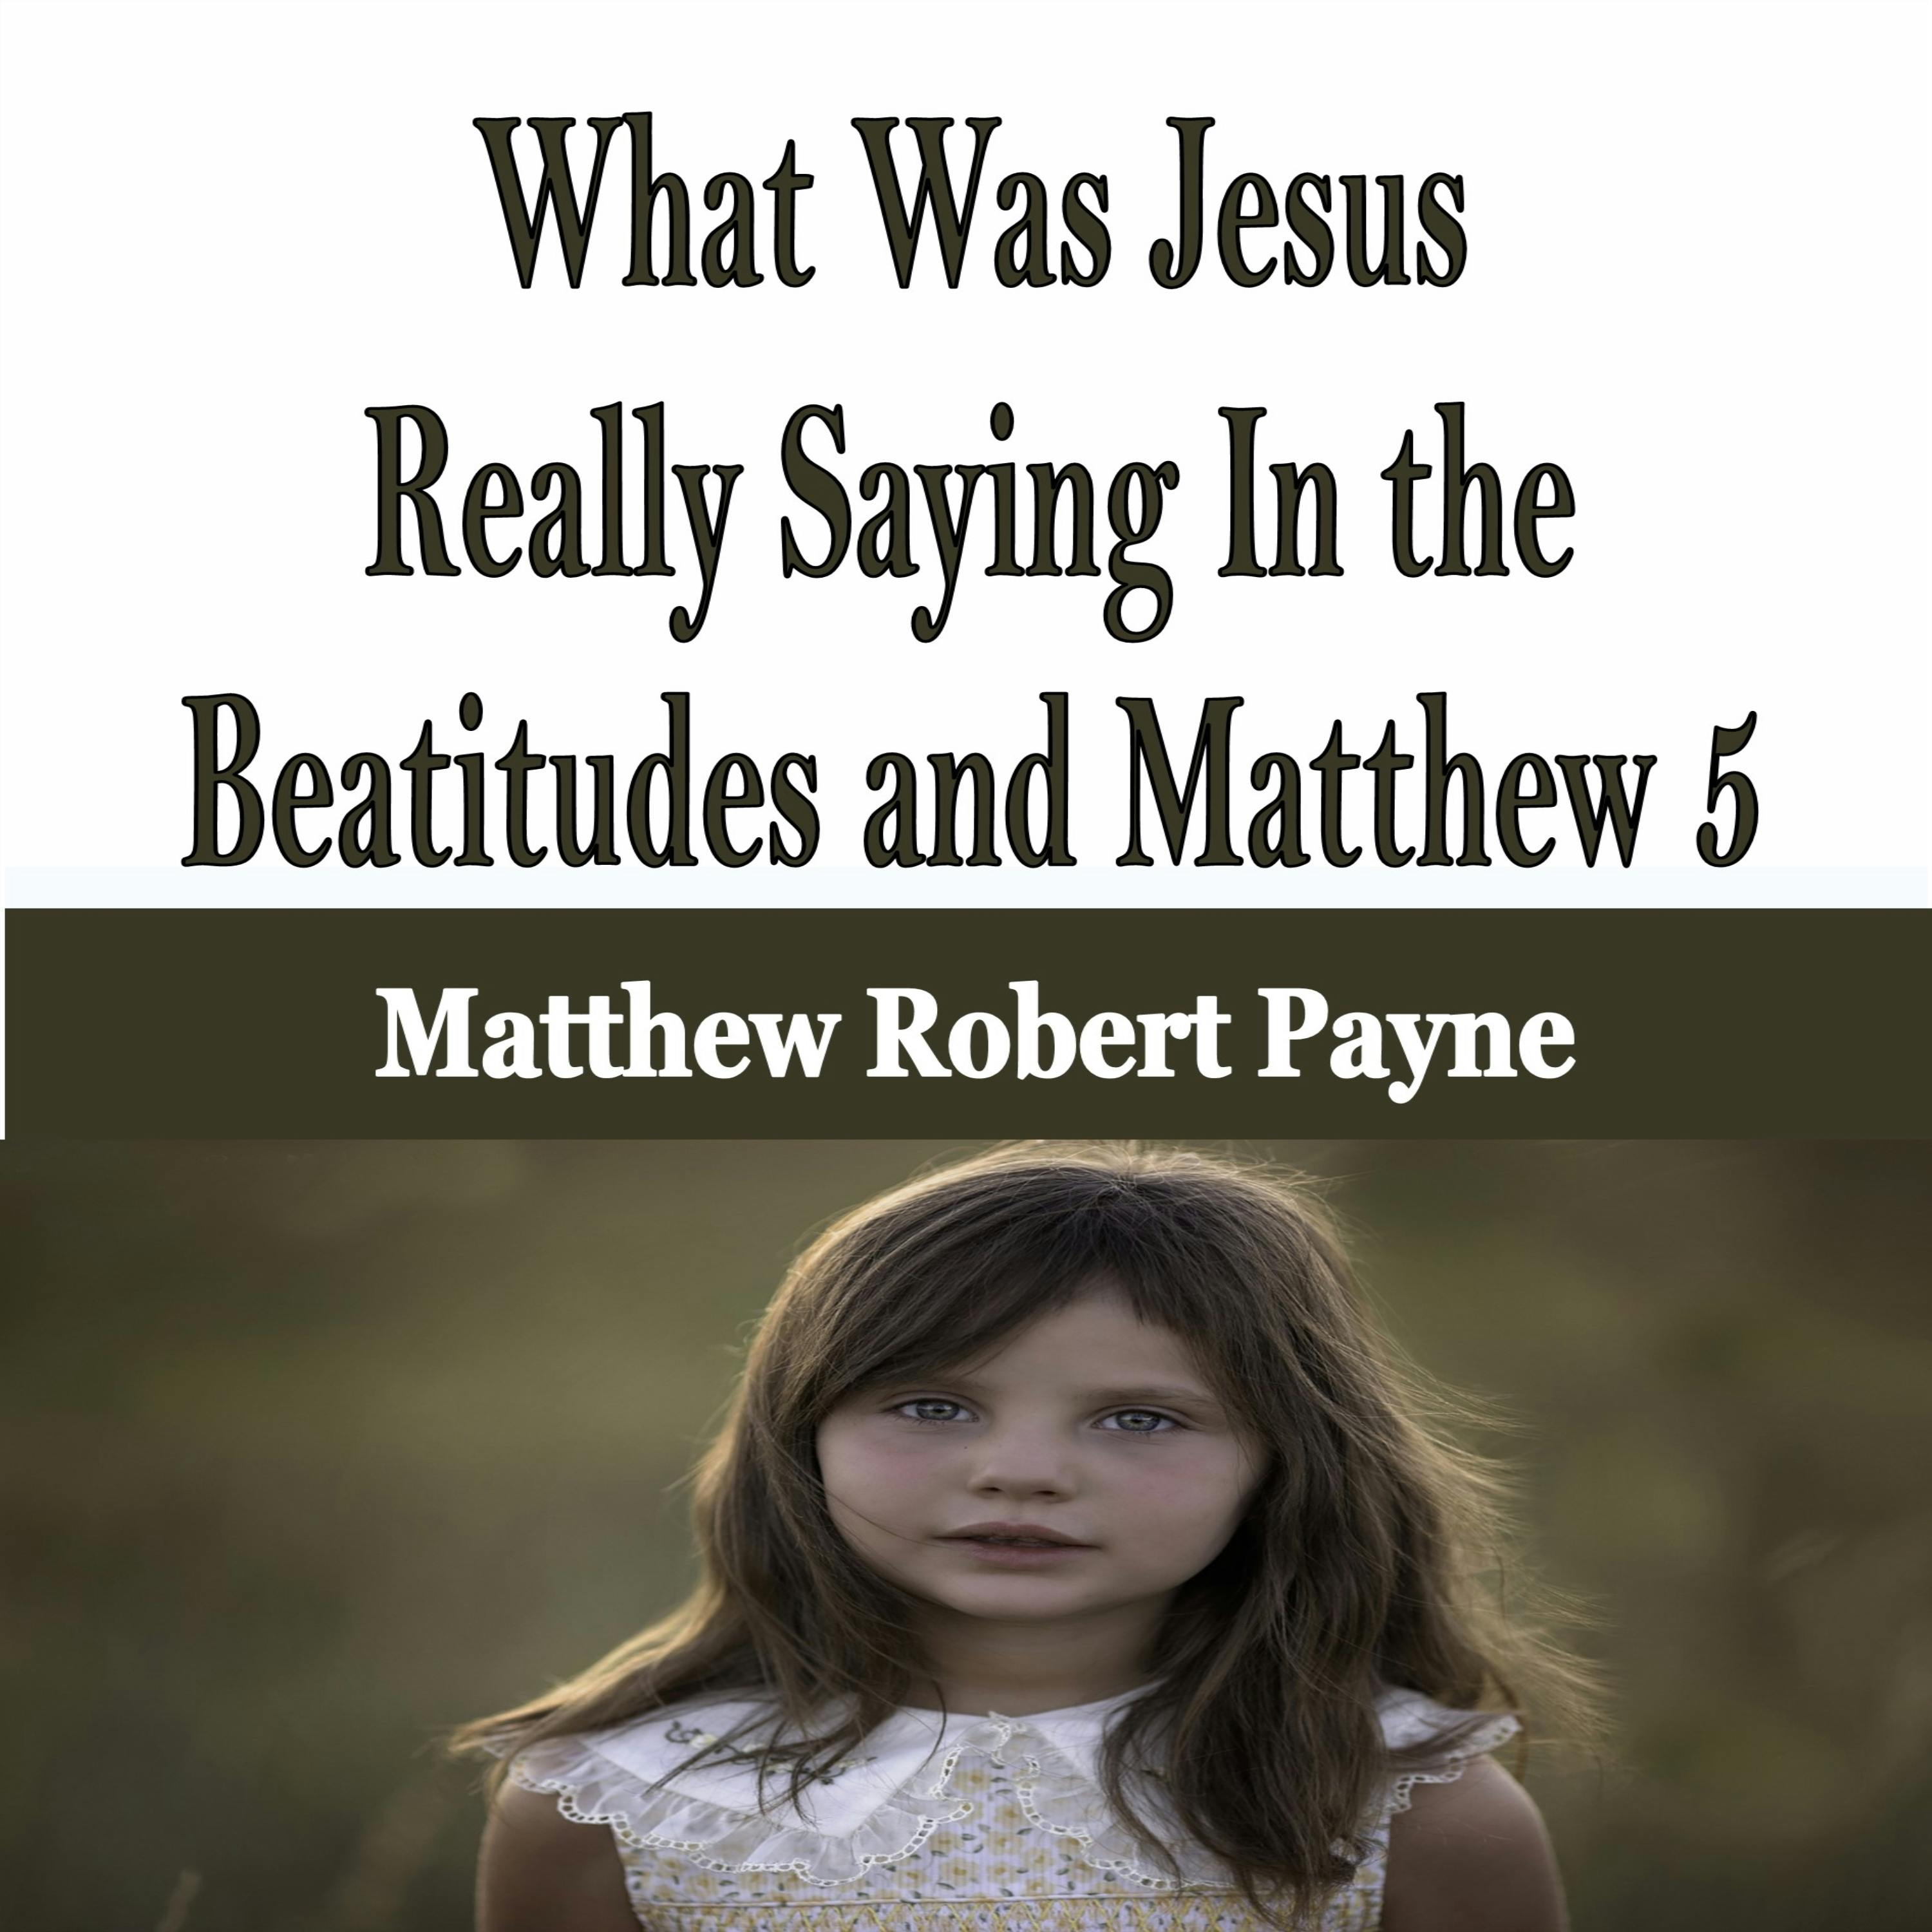 What Was Jesus Really Saying In the Beatitudes and Matthew 5 - undefined